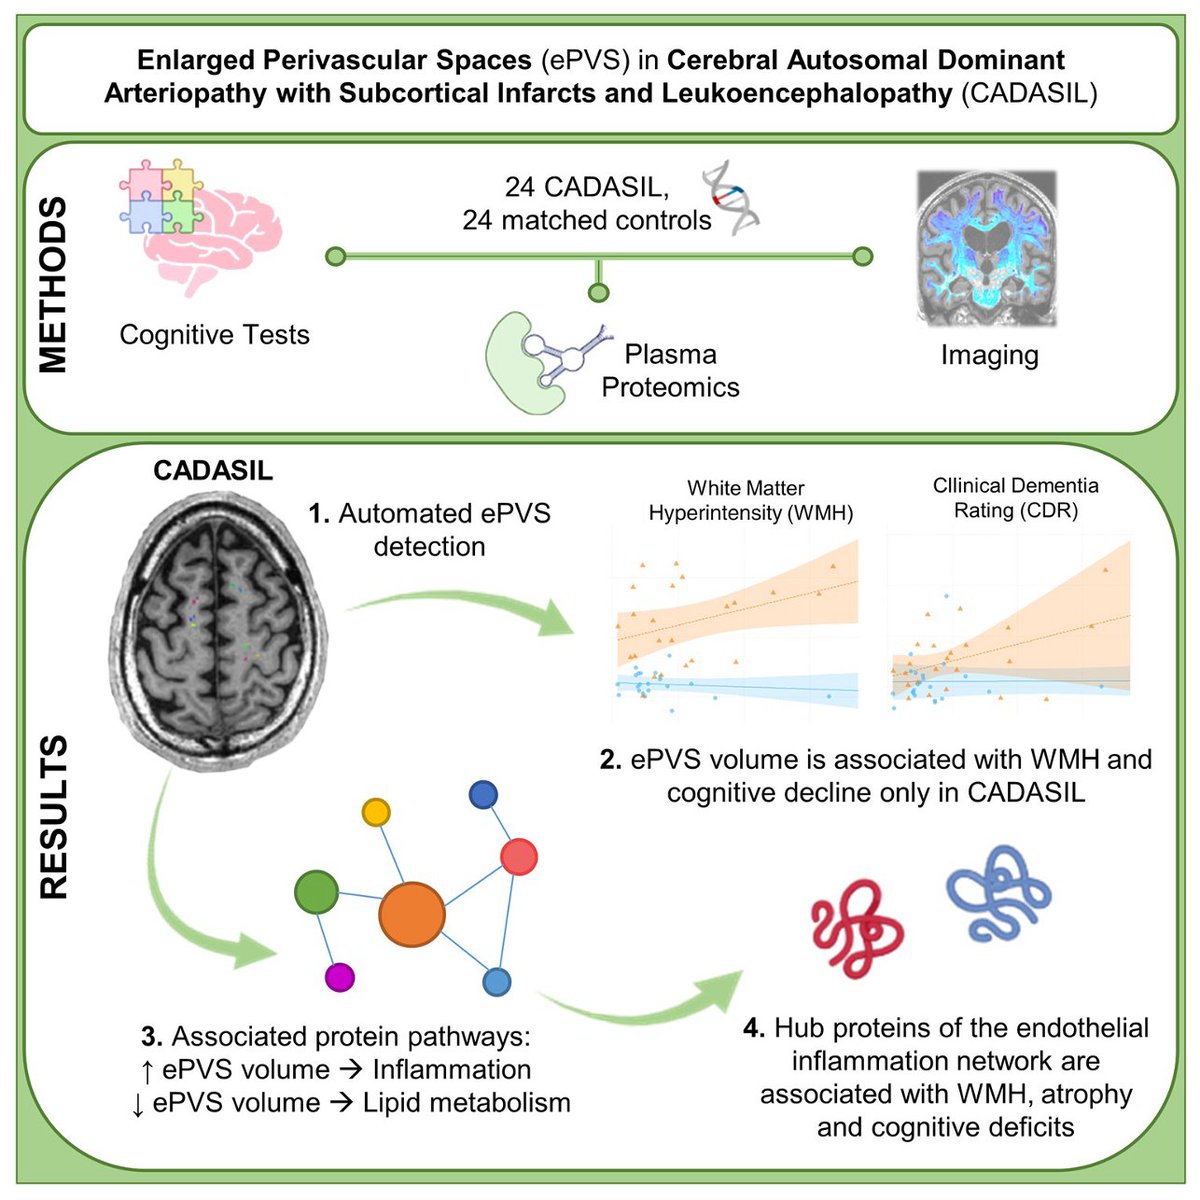 New paper from the Elahi Lab! Our latest work in @BrainComms provides new clues into the connection between enlarged perivascular spaces (ePVS), inflammation & cognition in #CADASIL. 🔗➡️academic.oup.com/braincomms/art…